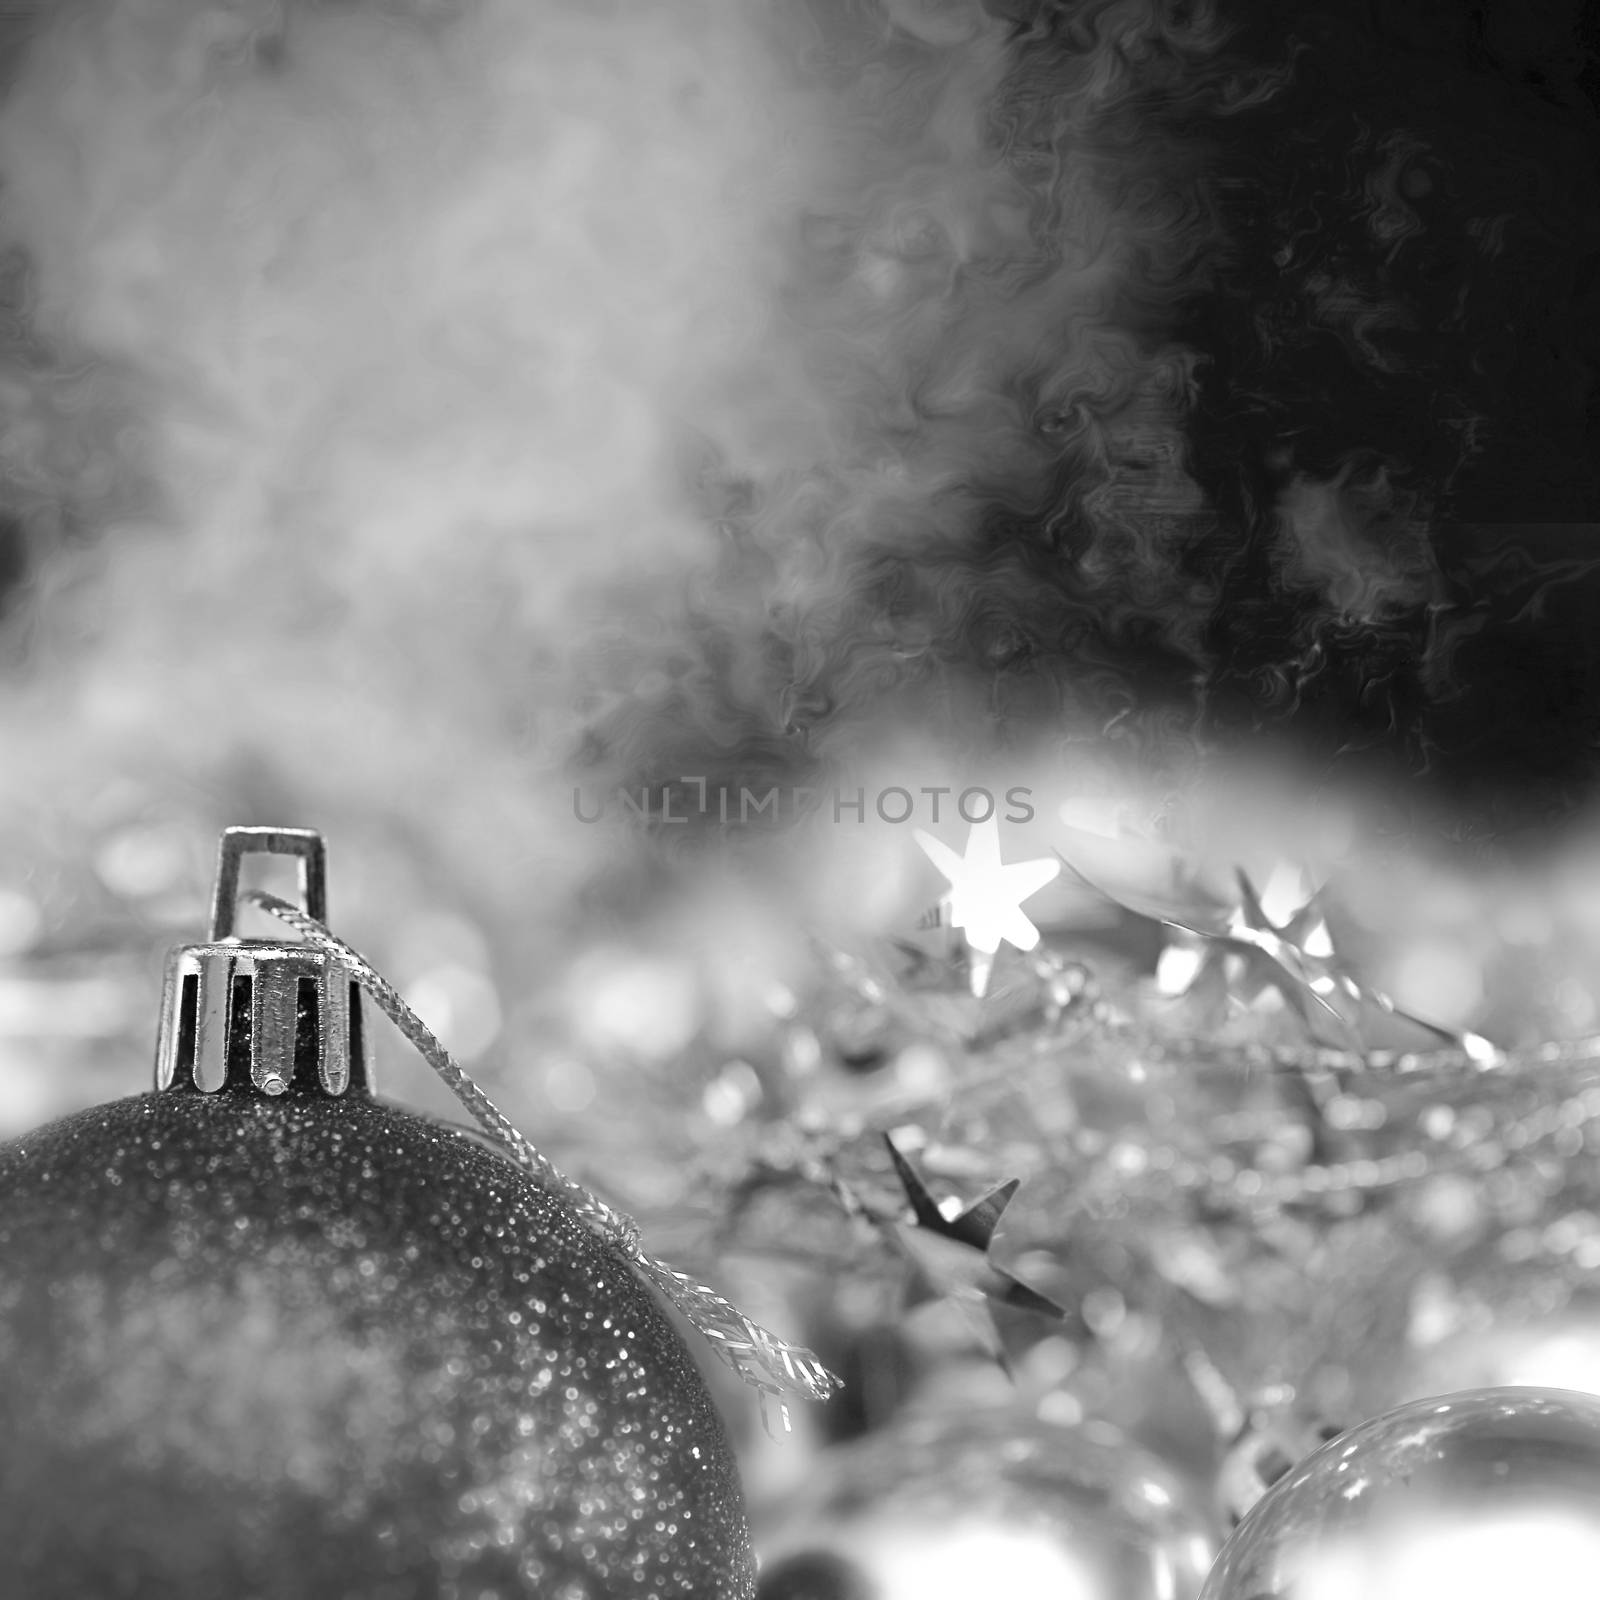 Bright Christmas background in black and white by Carche